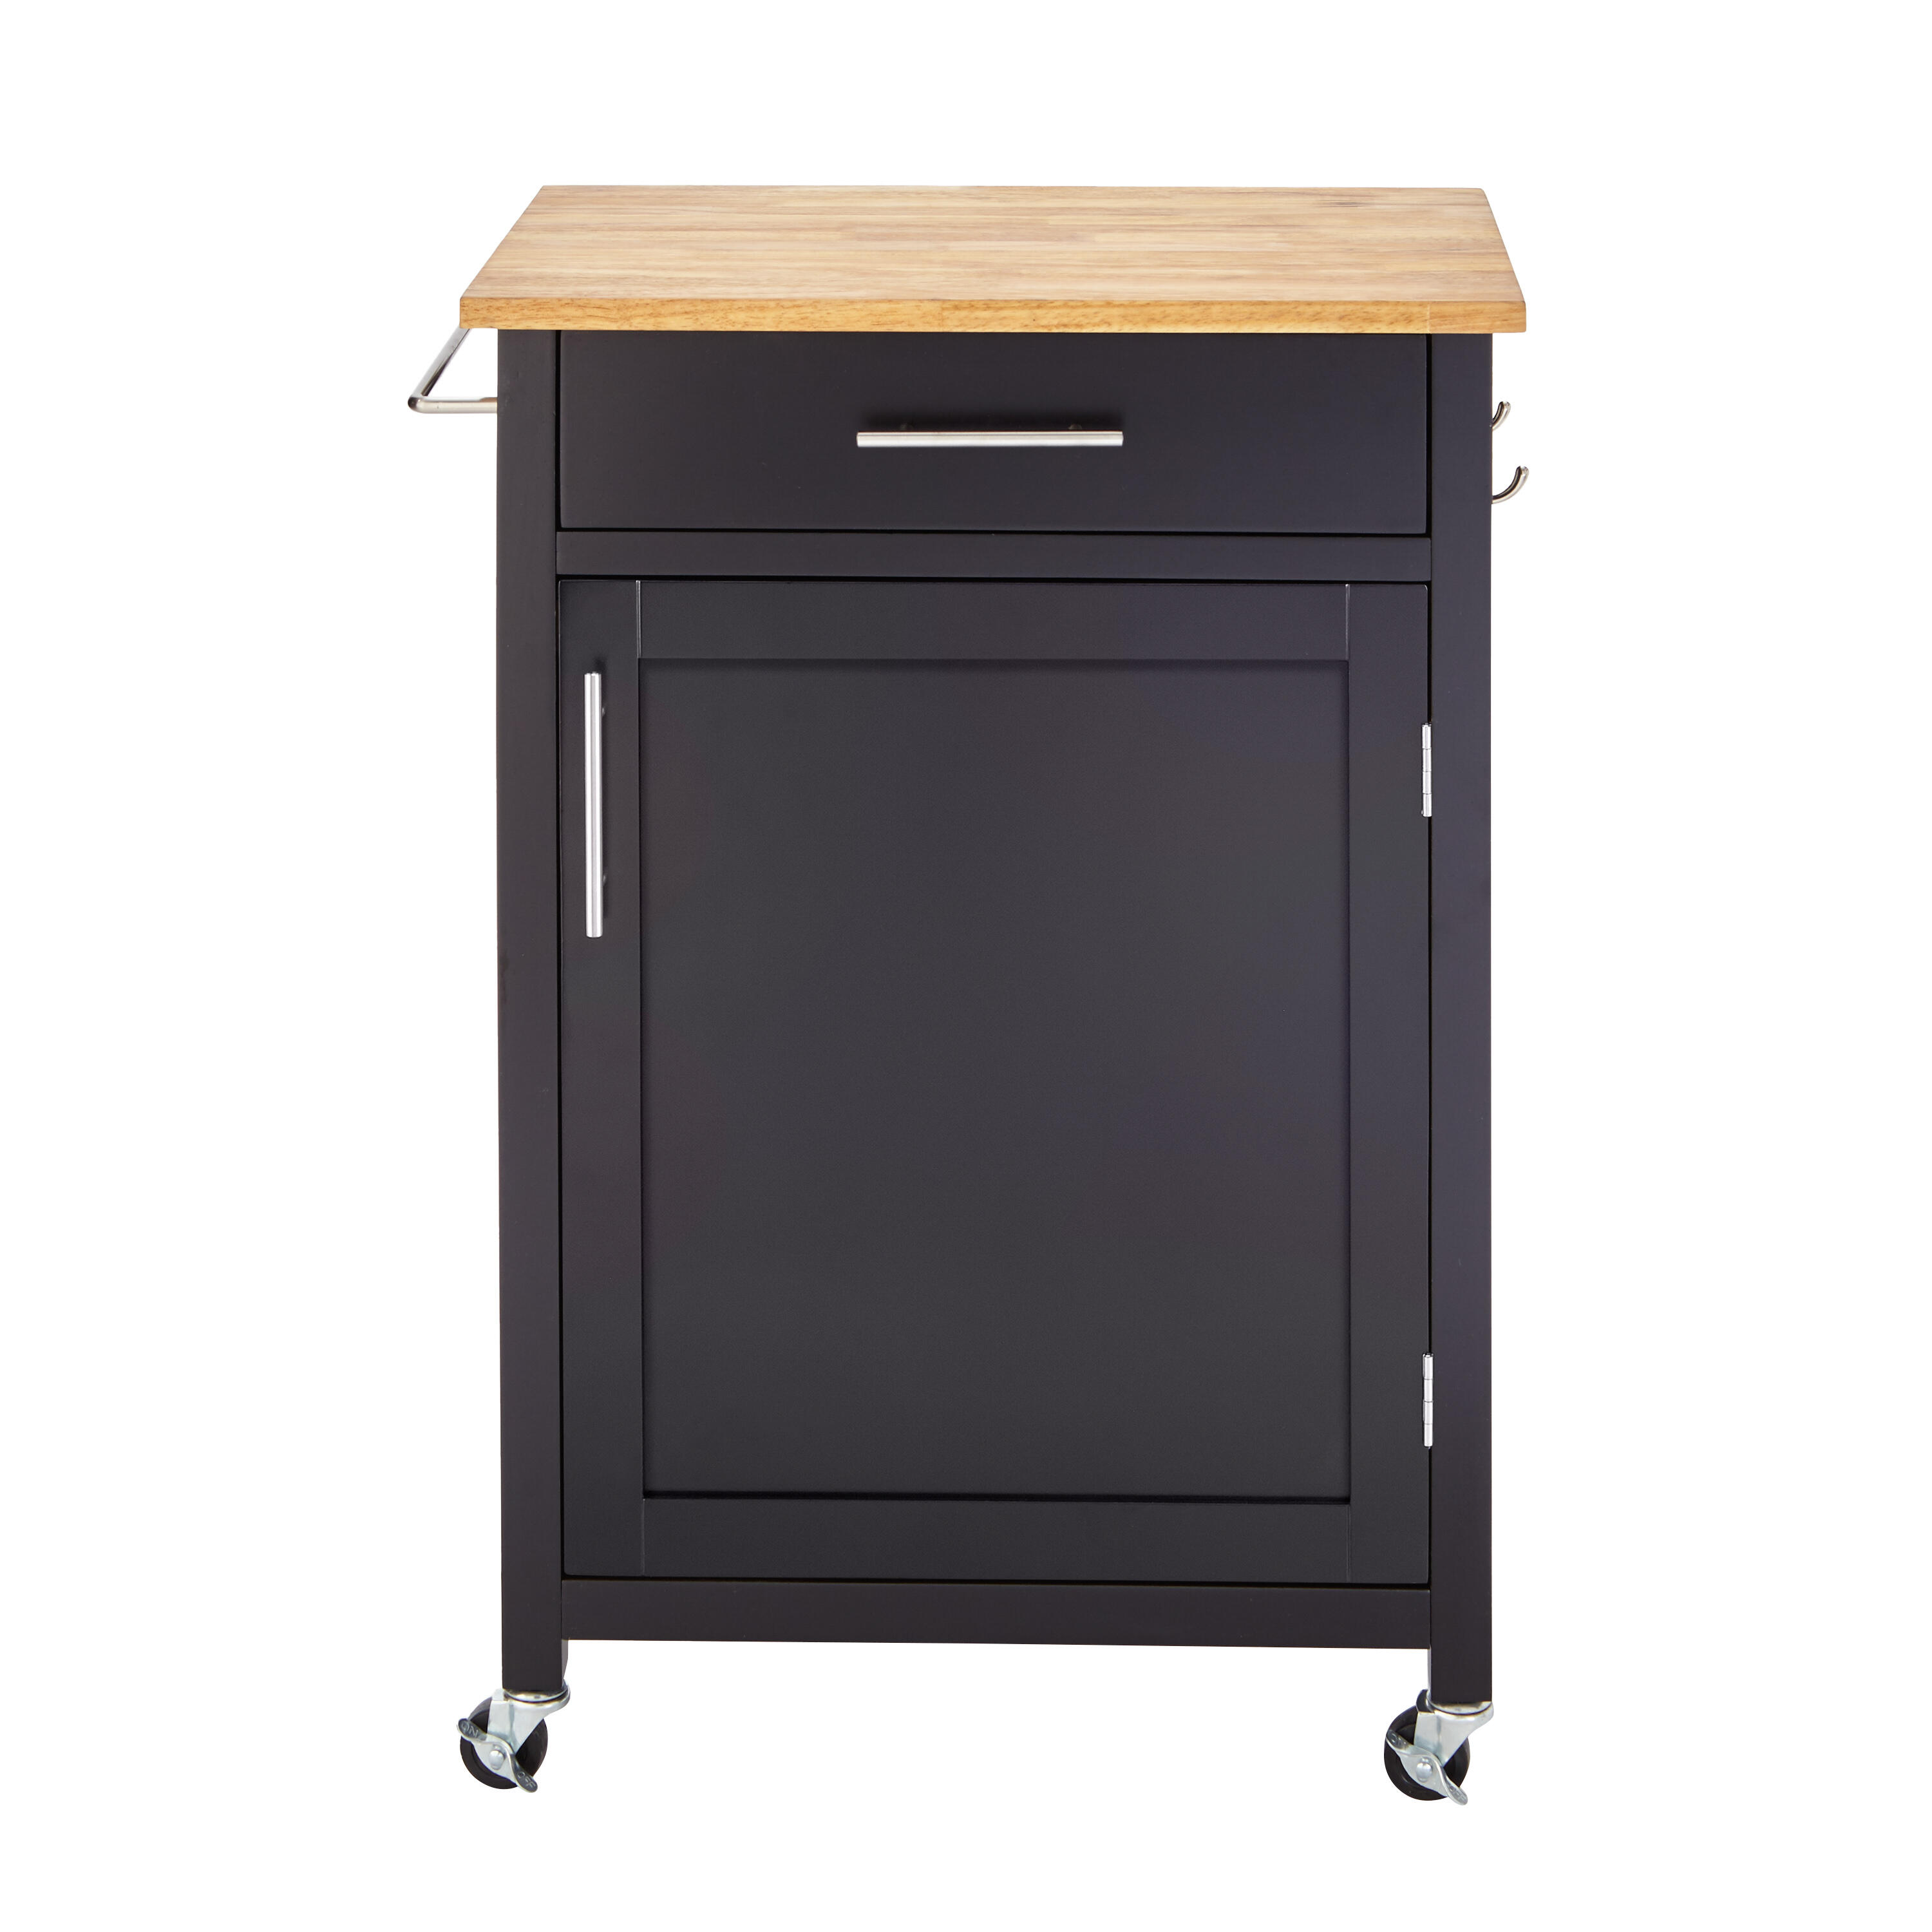 StyleWell Glenville Black Kitchen Cart with 1 Drawer